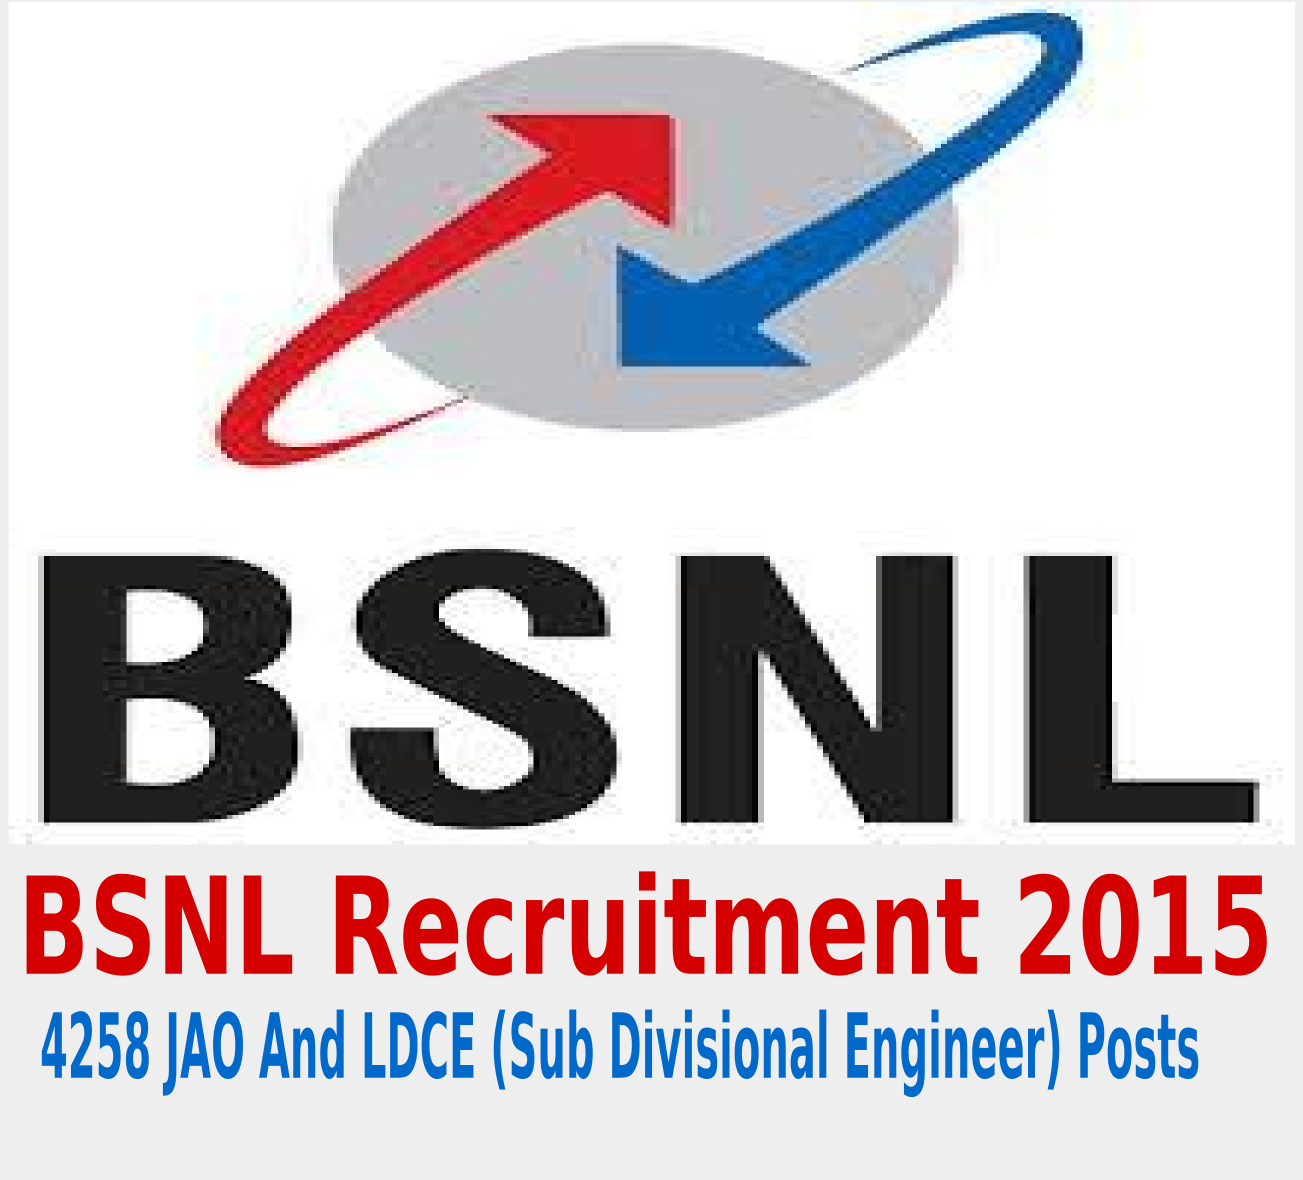 BSNL Recruitment 2015 For JAO and LDCE (Sub Divisional Engineer) Posts